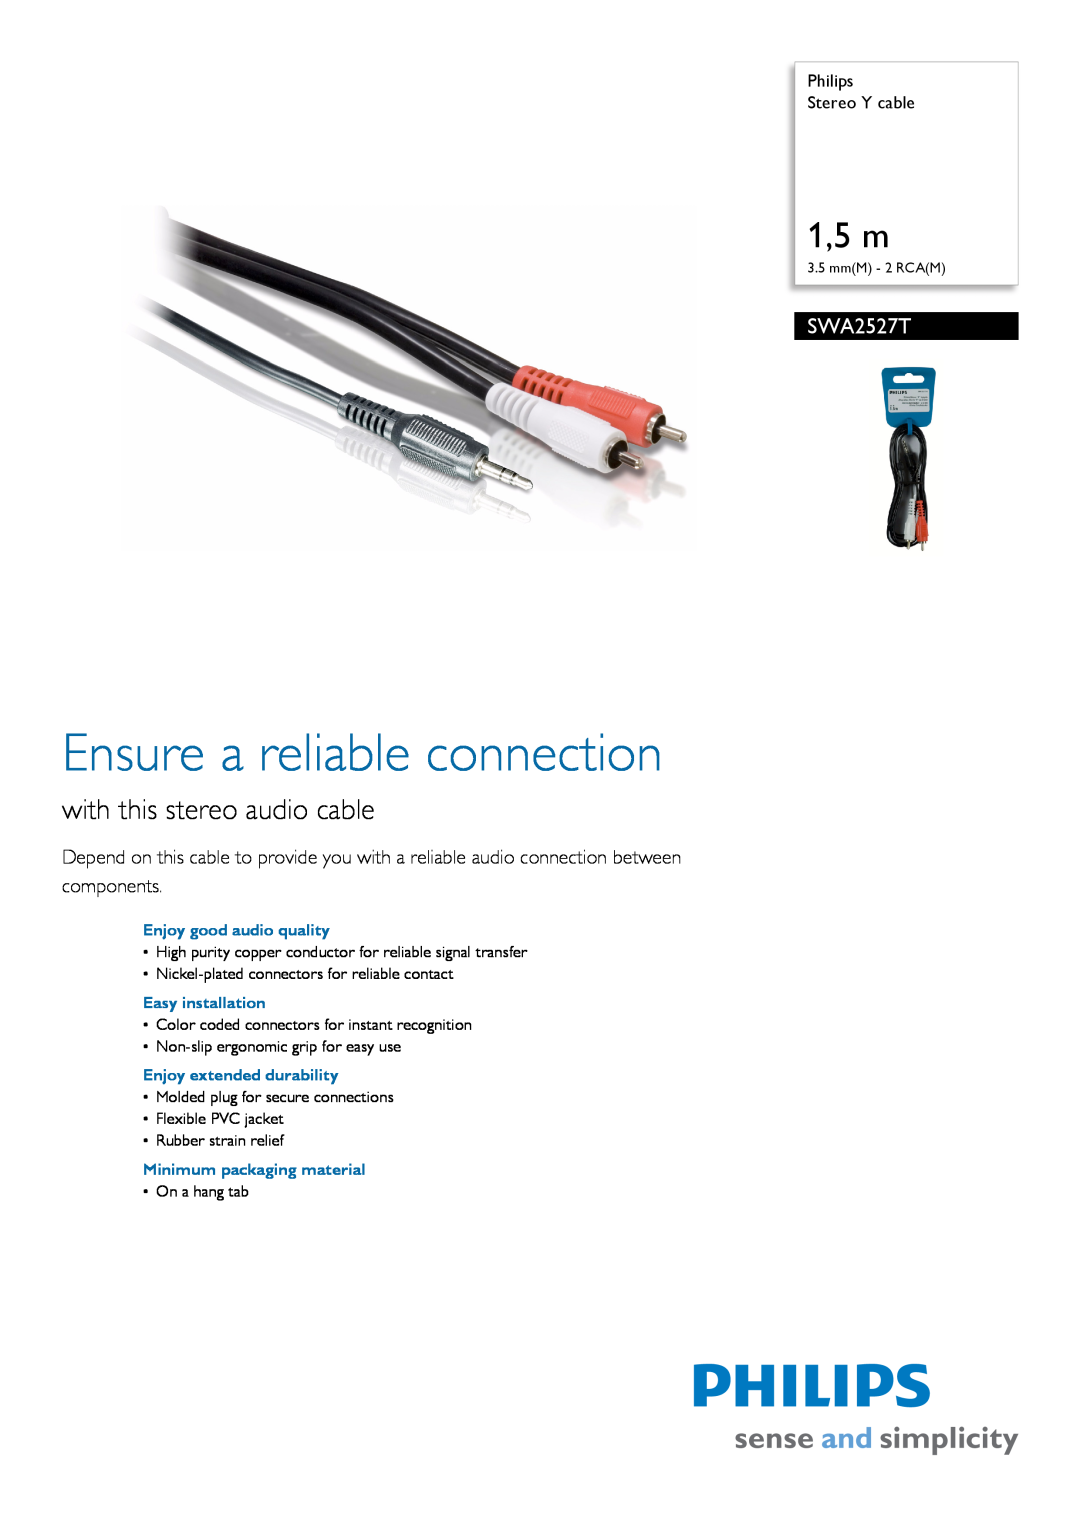 Philips SWA2527T manual Philips Stereo Y cable, Ensure a reliable connection, 1,5 m, with this stereo audio cable 